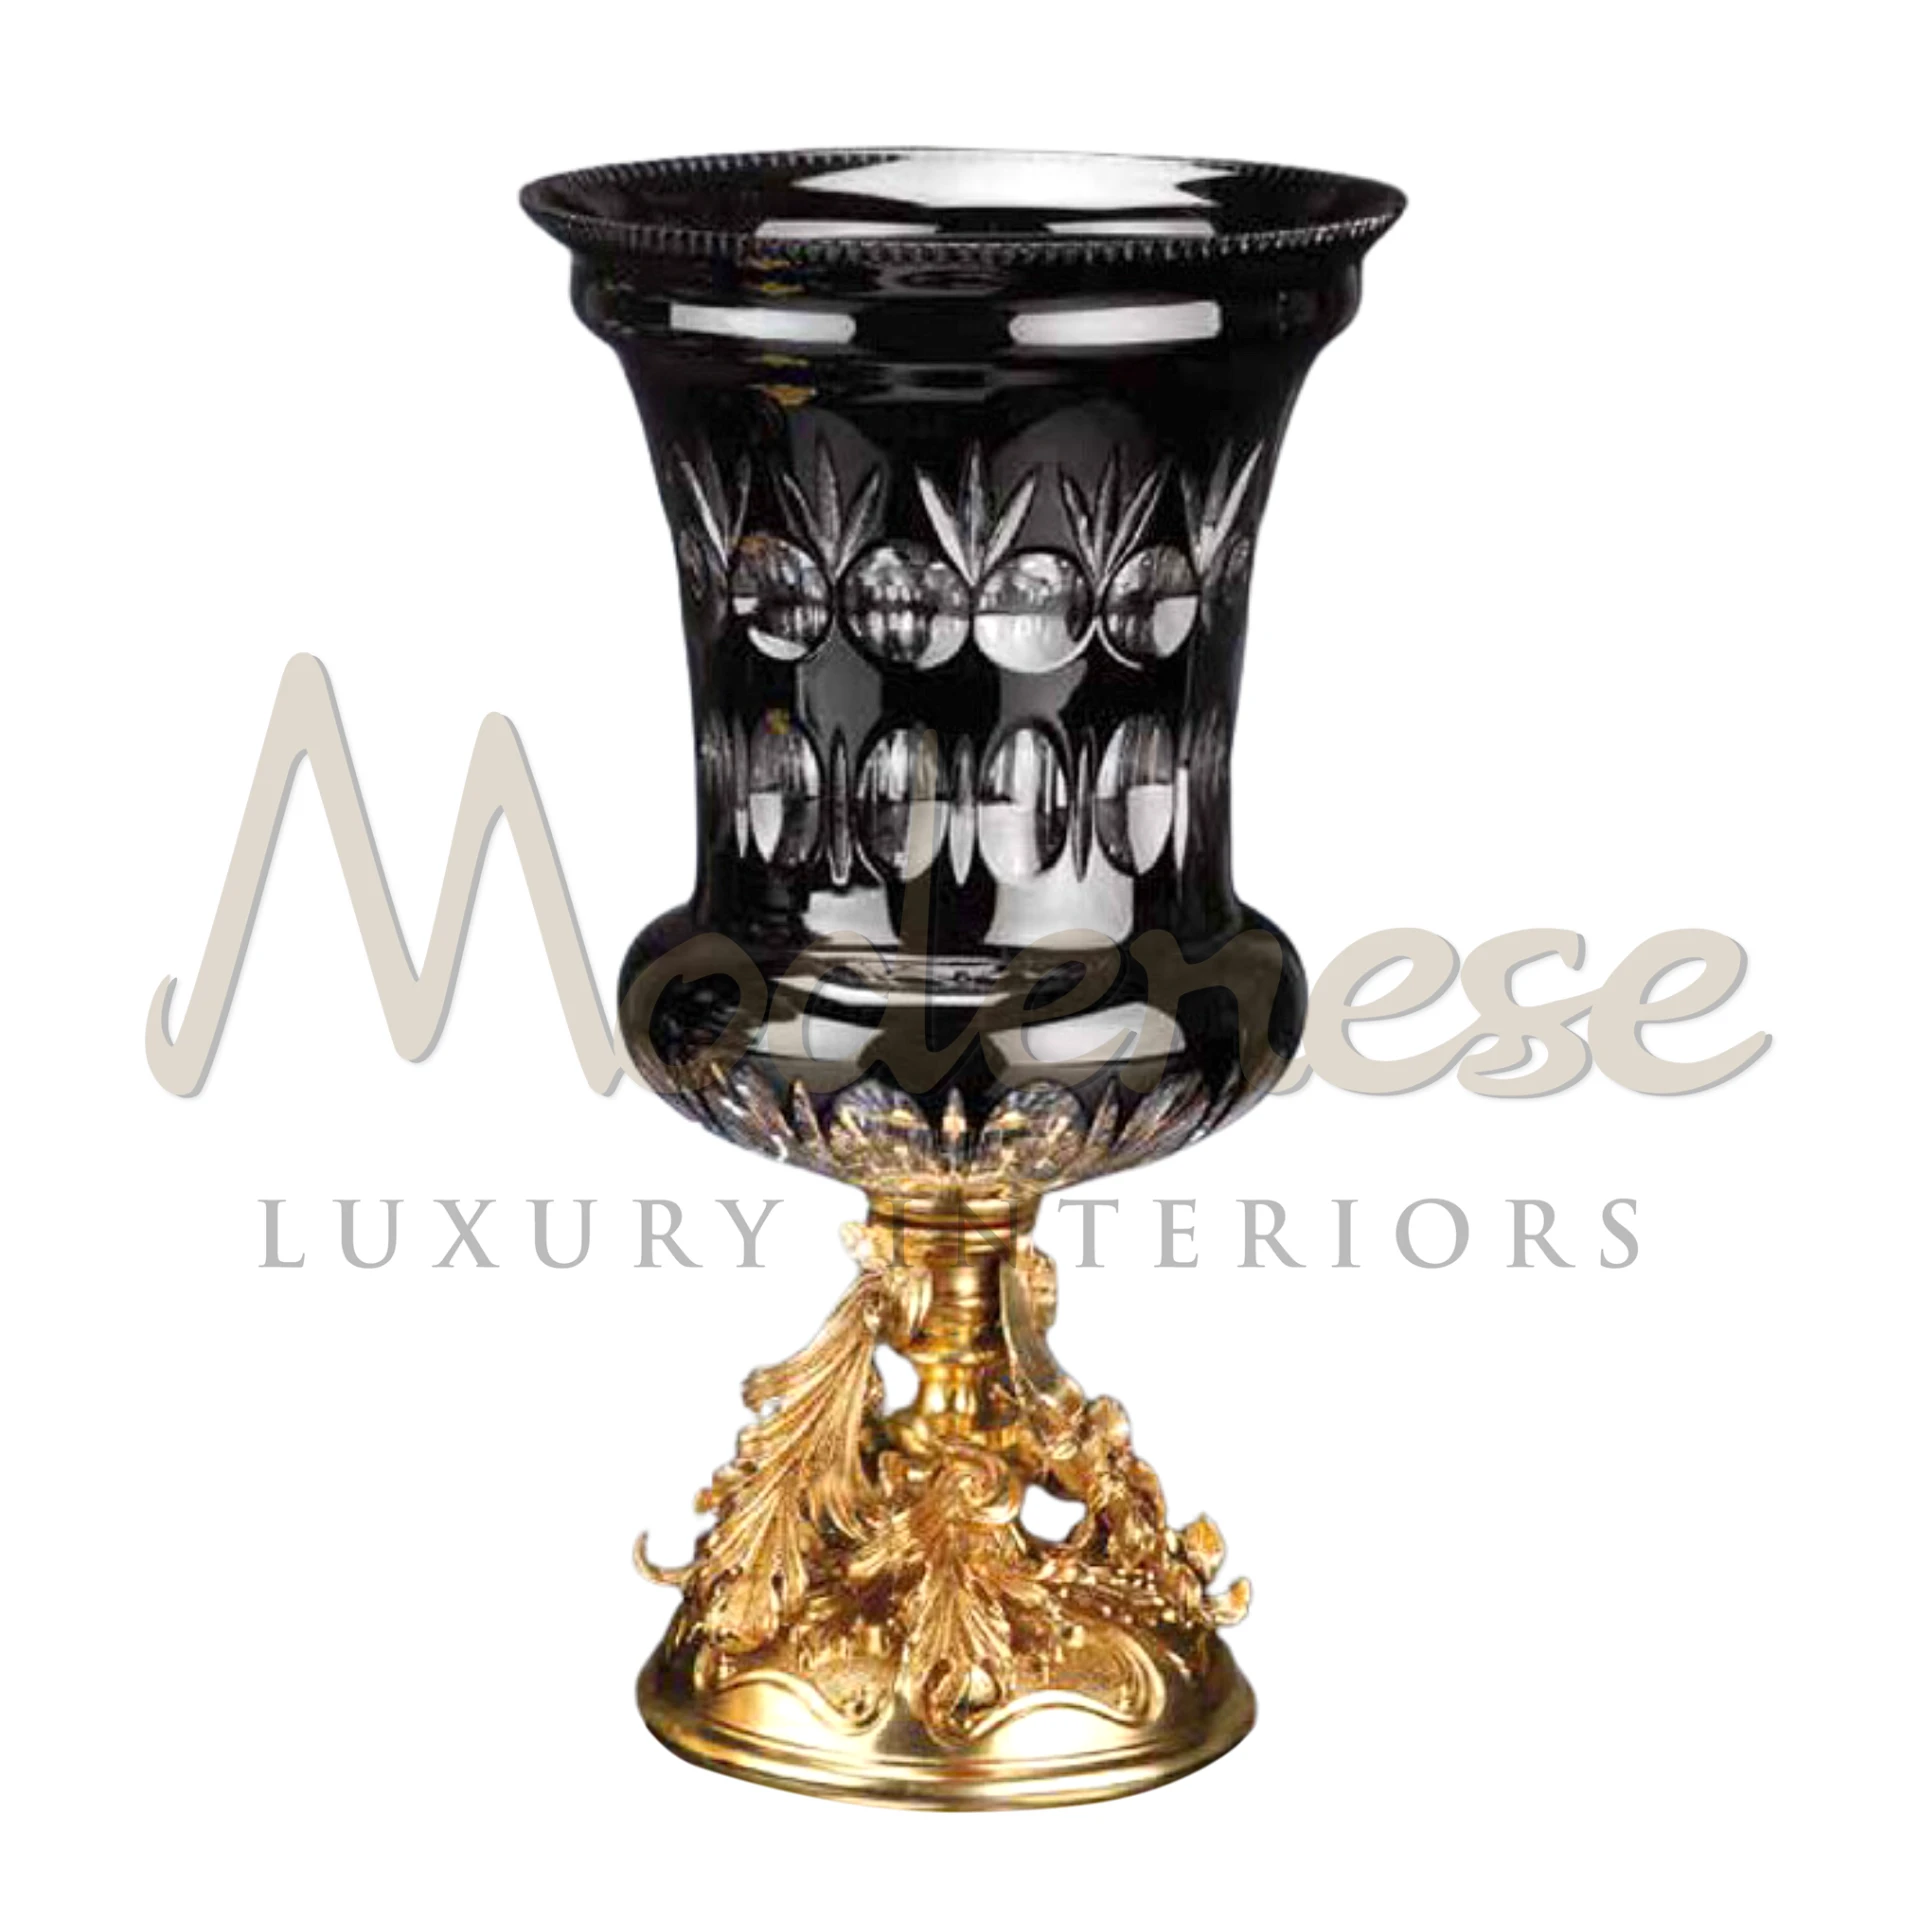 Exquisite Luxury Pedestal Black Vase, a striking piece for sophisticated interior design, perfect for displaying flowers or as a standalone decorative object.






